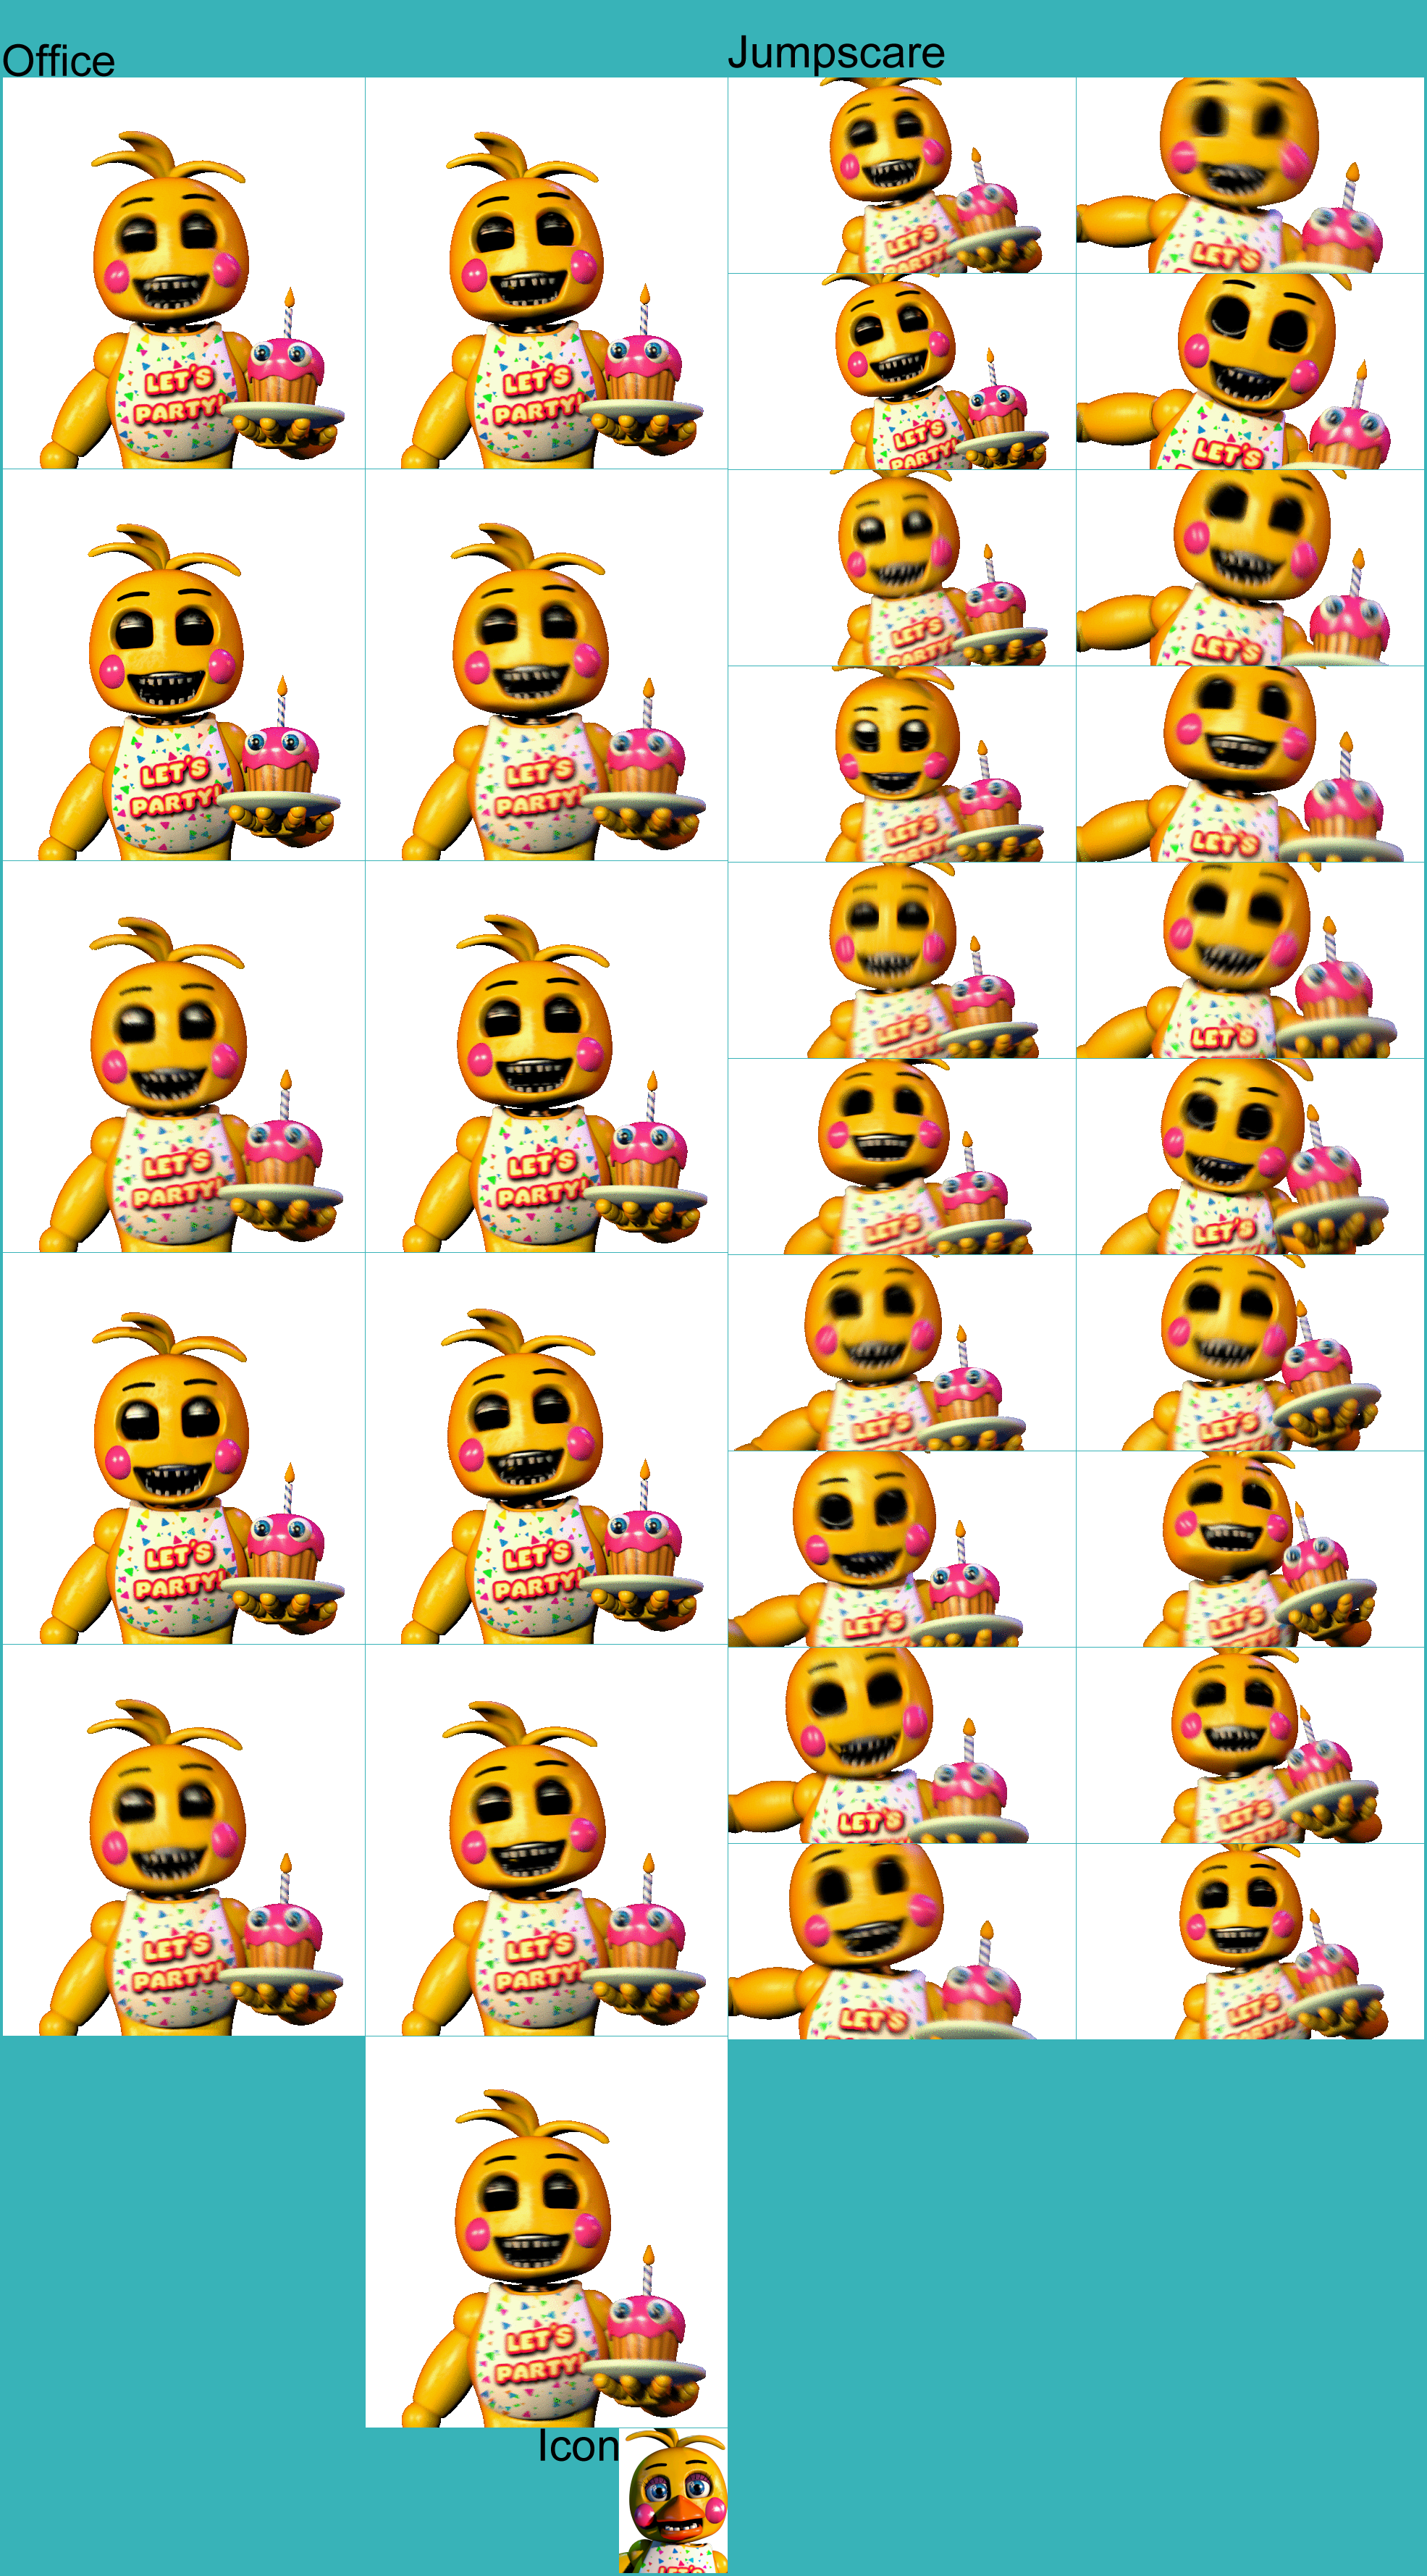 PC / Computer - Ultimate Custom Night - Withered Chica - The Spriters  Resource